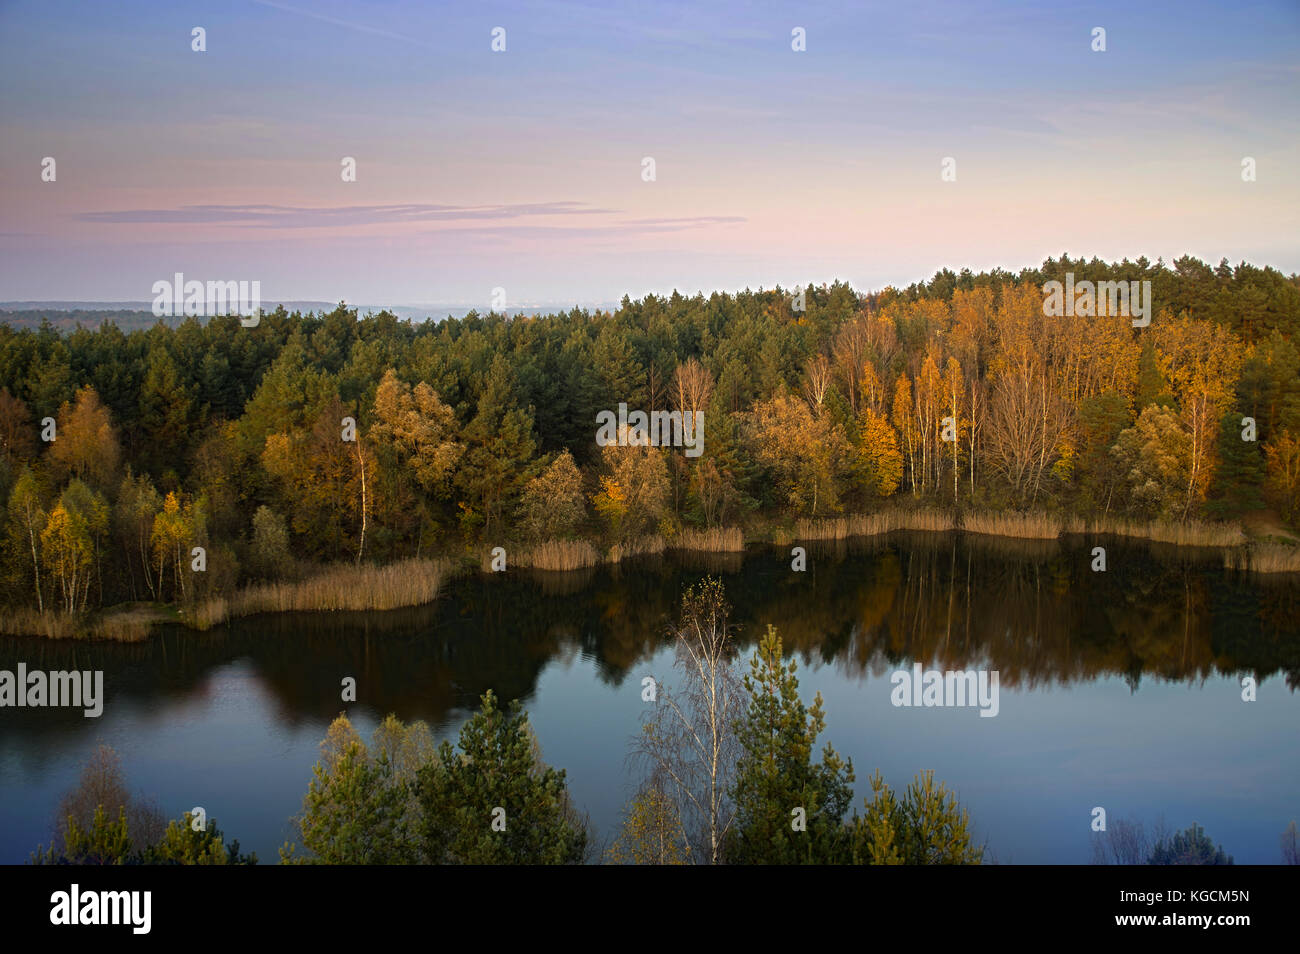 Golden autumn trees in forest on shore of the lake. Typical seasonal view with reflection in water. Stock Photo